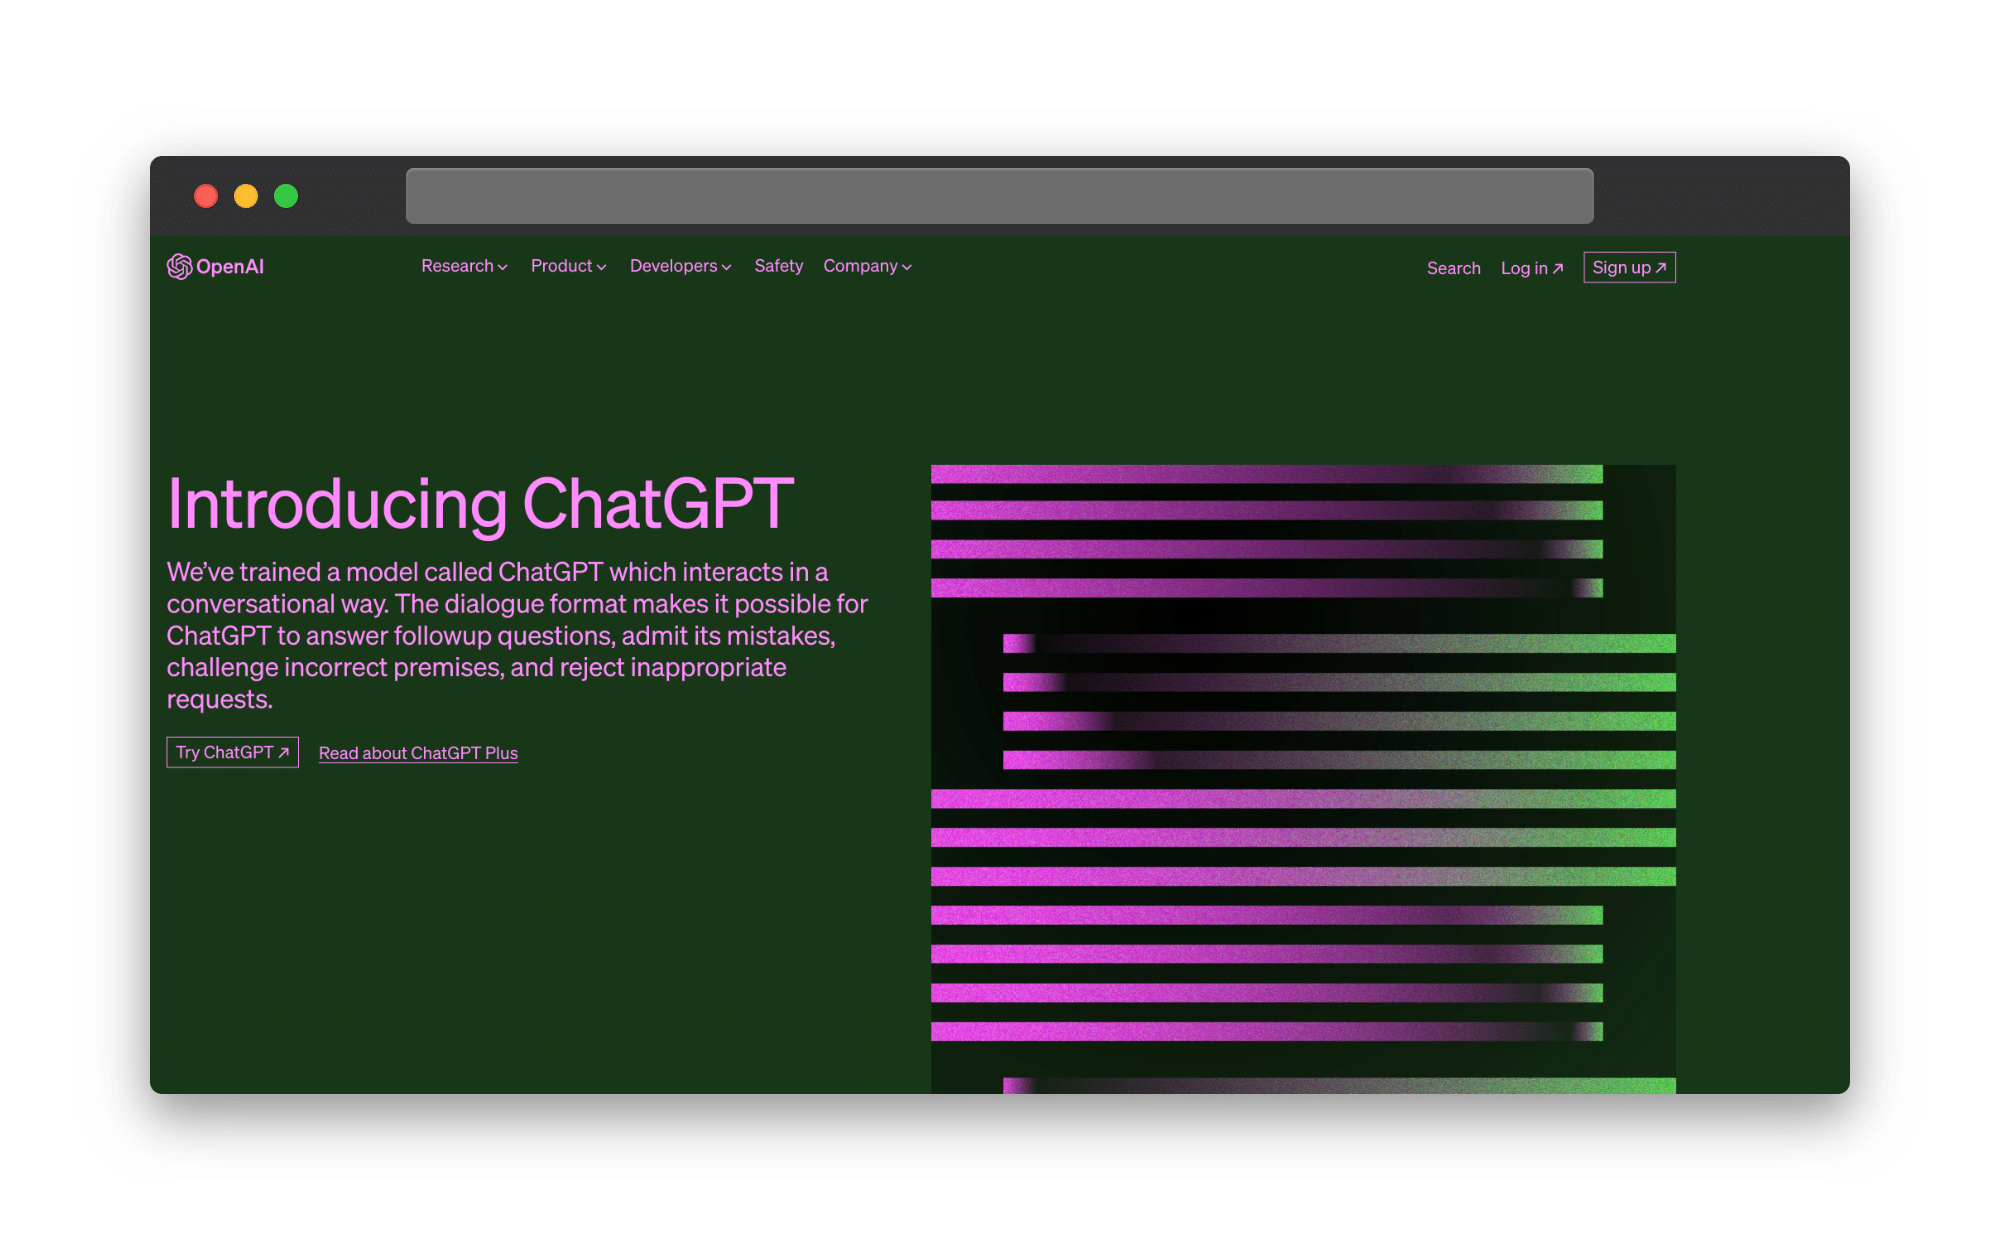 ChatGPT is a natural language processing tool that uses human speech data to respond to questions or prompts.